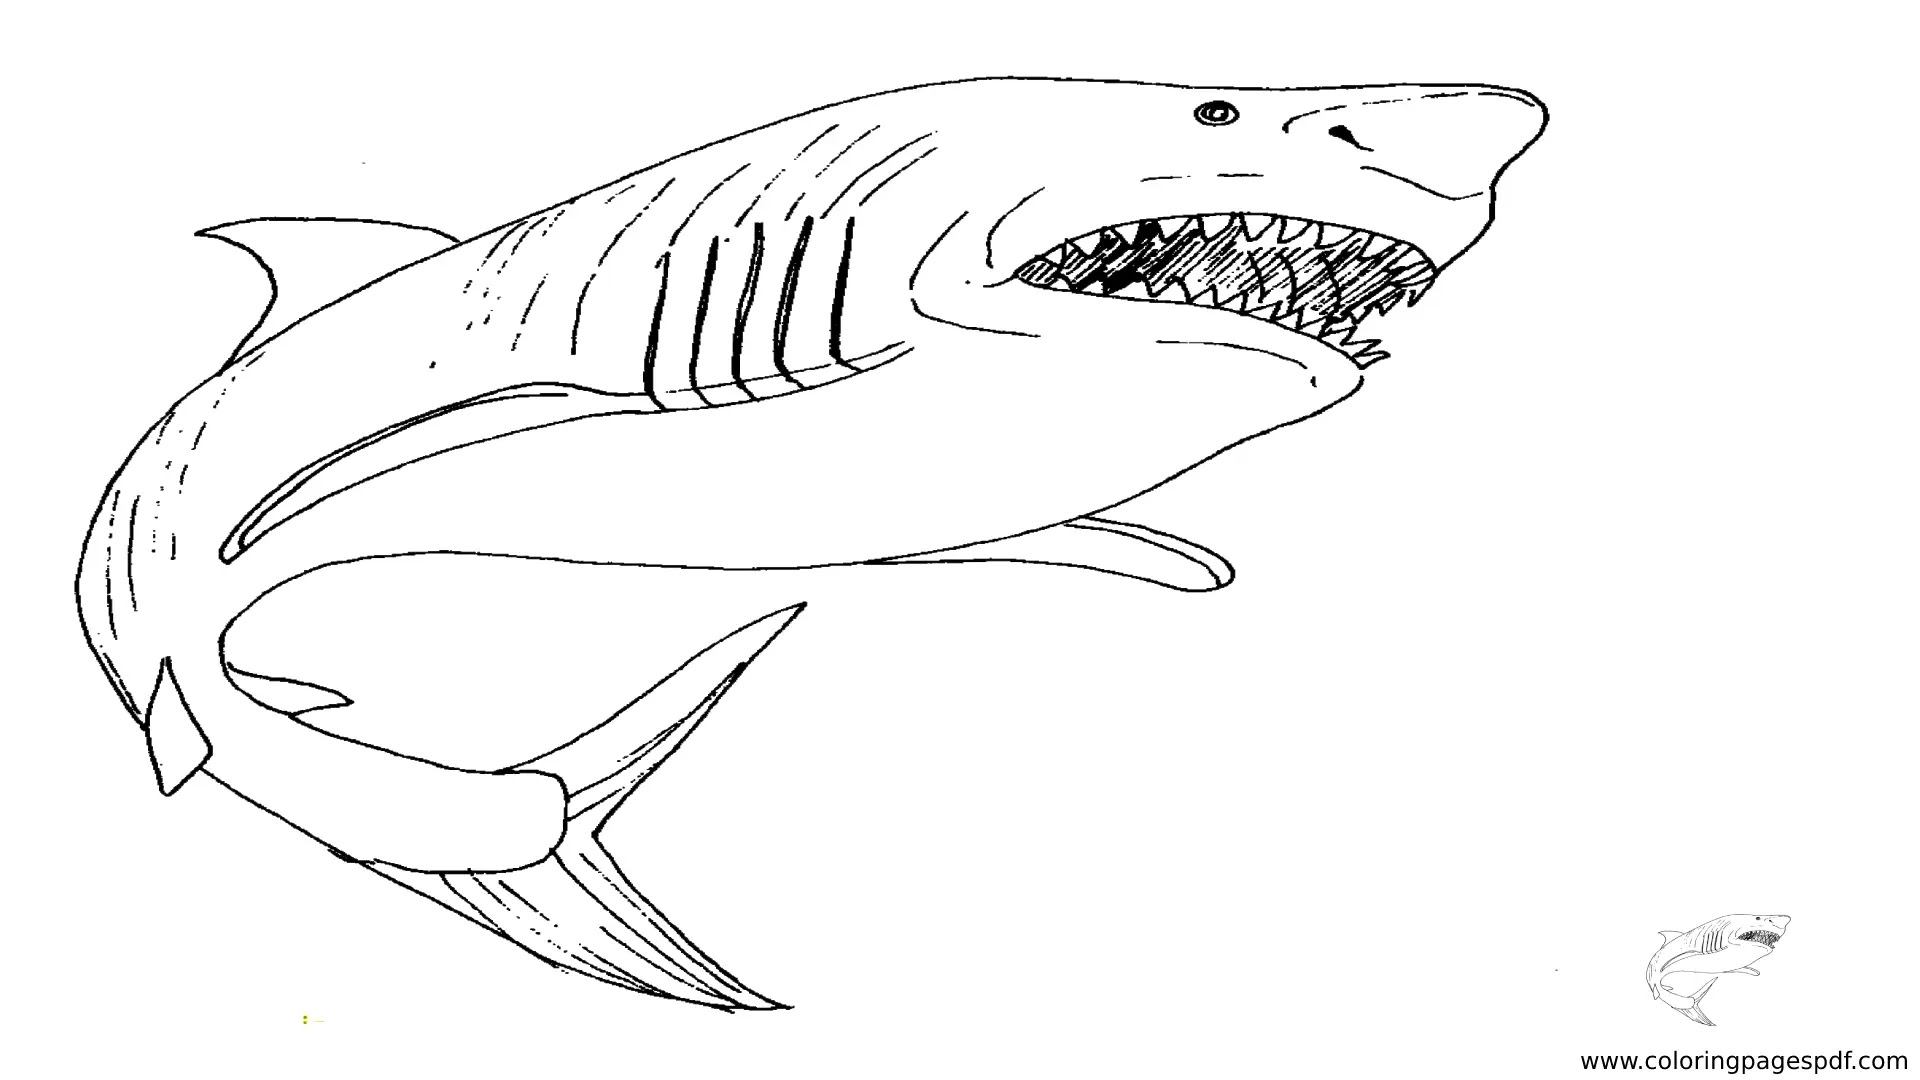 Coloring Pages Of An Aggressive Shark